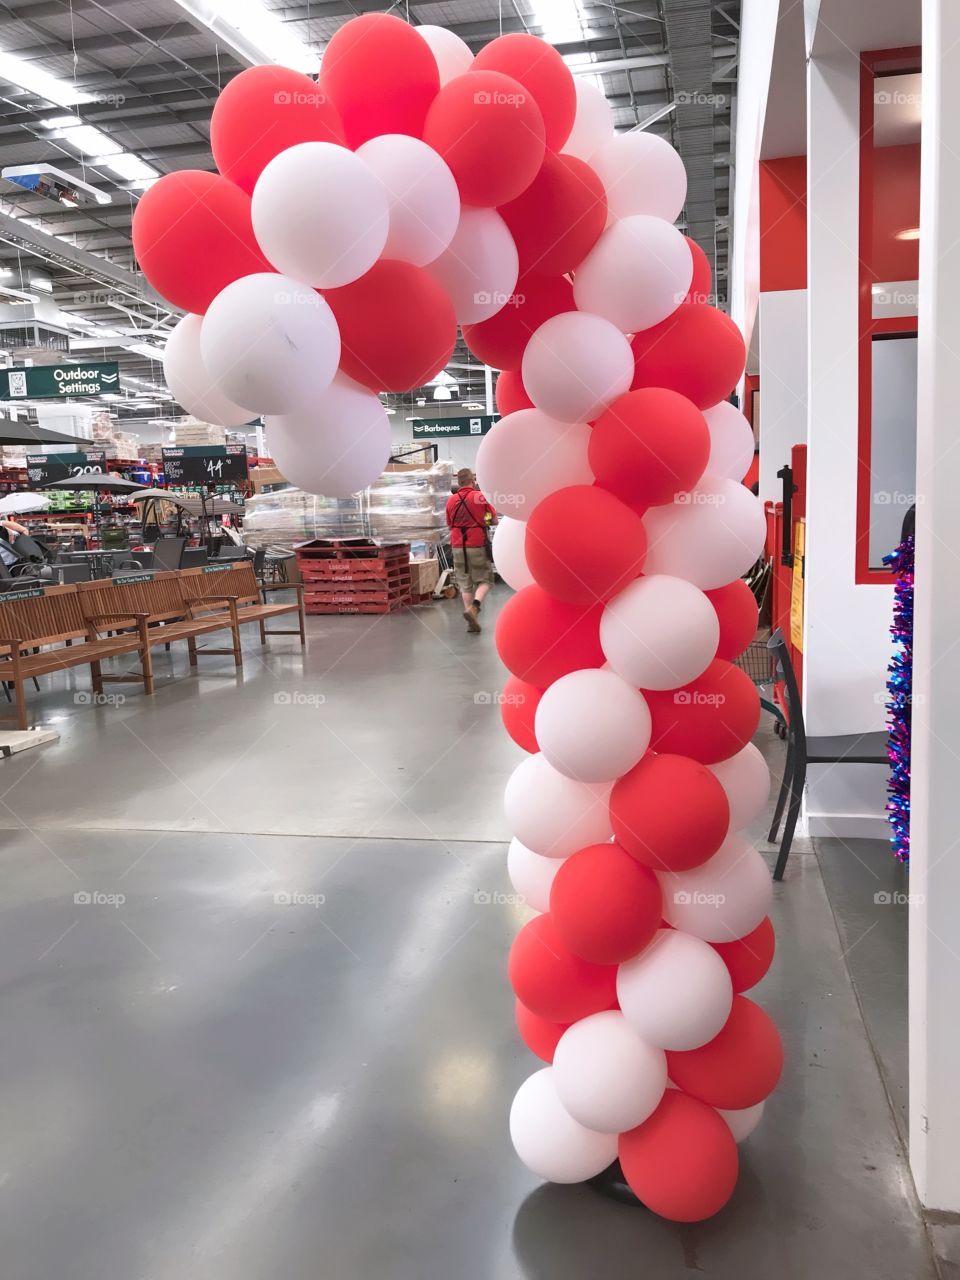 Christmas decorating with image of Candy balloons at Bunning Warehouse Mentone Melbourne Australia 